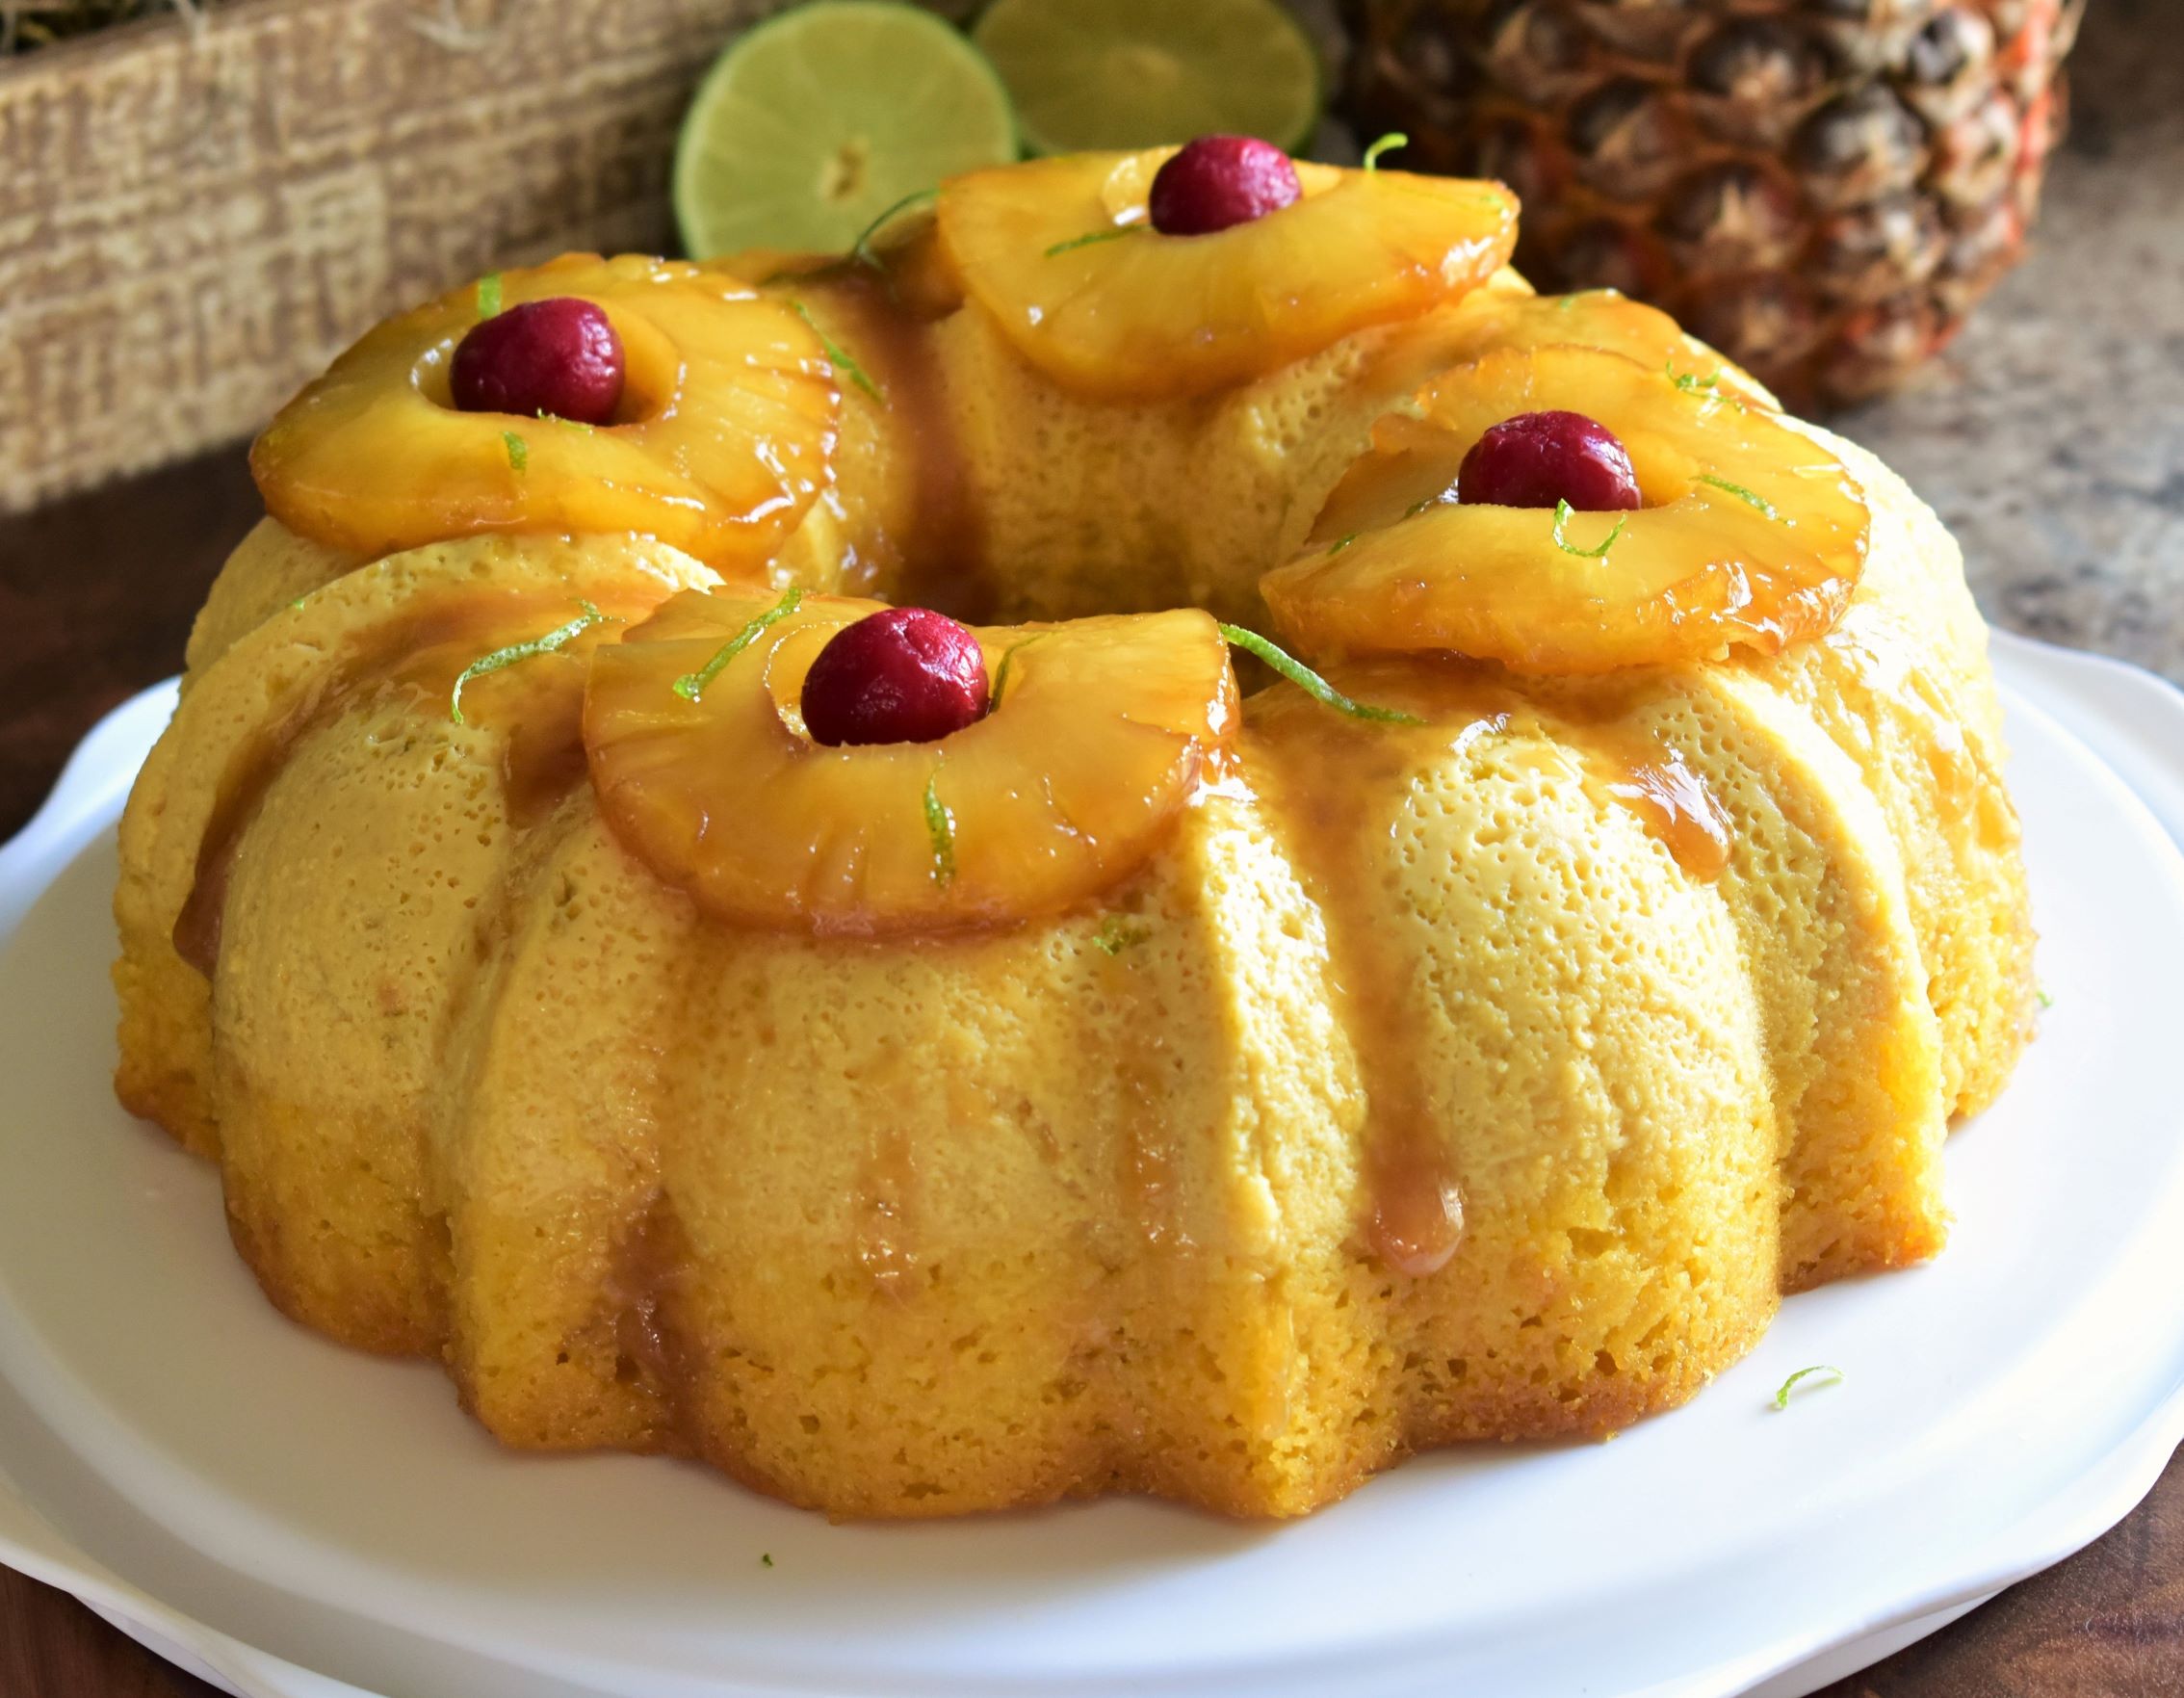 Pineapple-Lime Impossible Cake